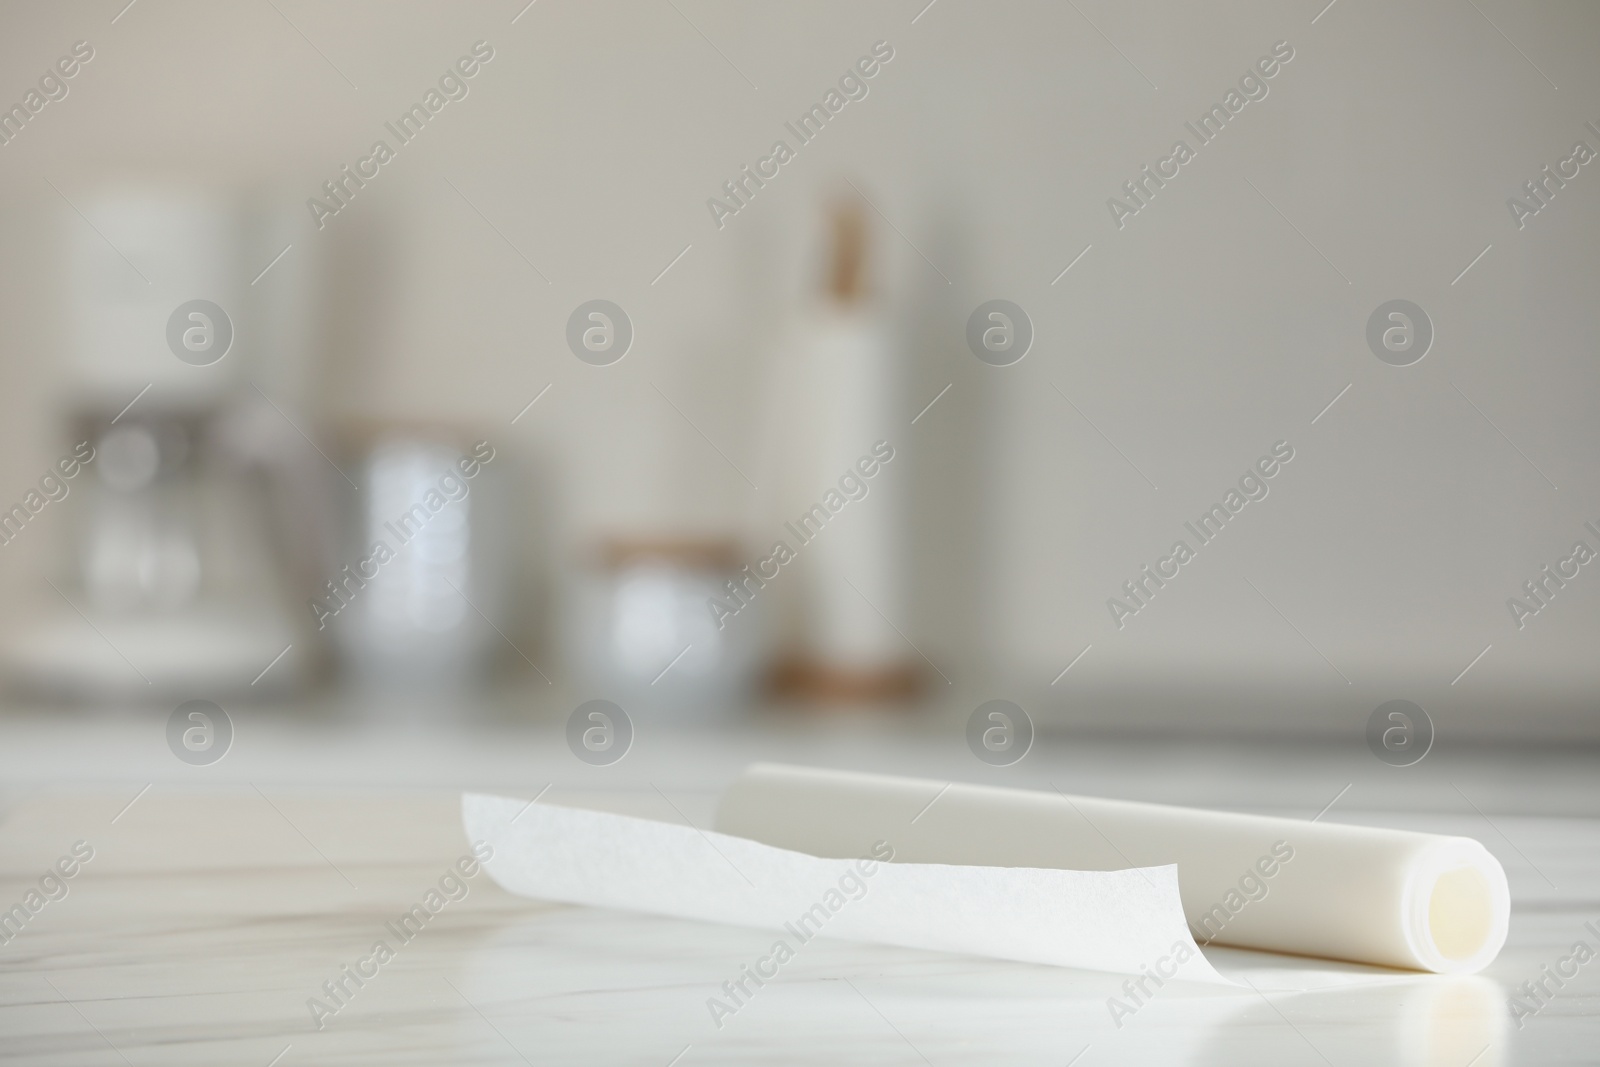 Photo of Roll of baking paper on white marble table against blurred background indoors. Space for text